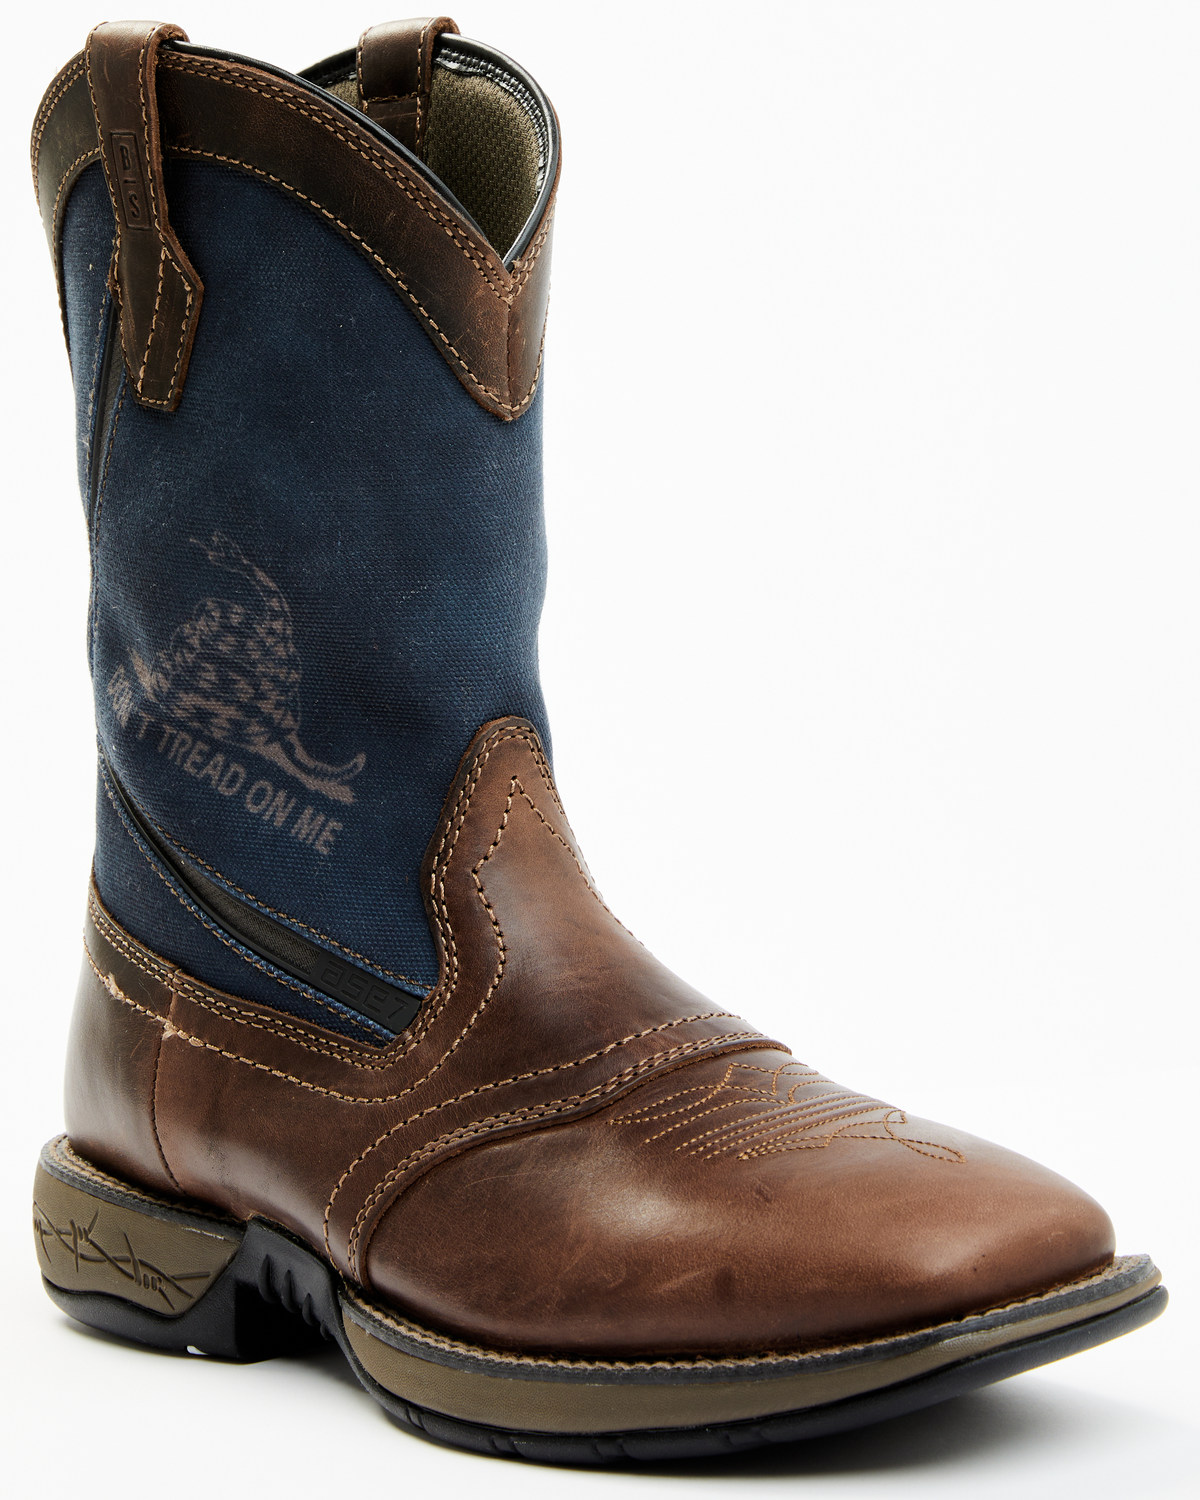 Brothers and Sons Men's Xero Gravity Lite Western Performance Boots - Broad Square Toe